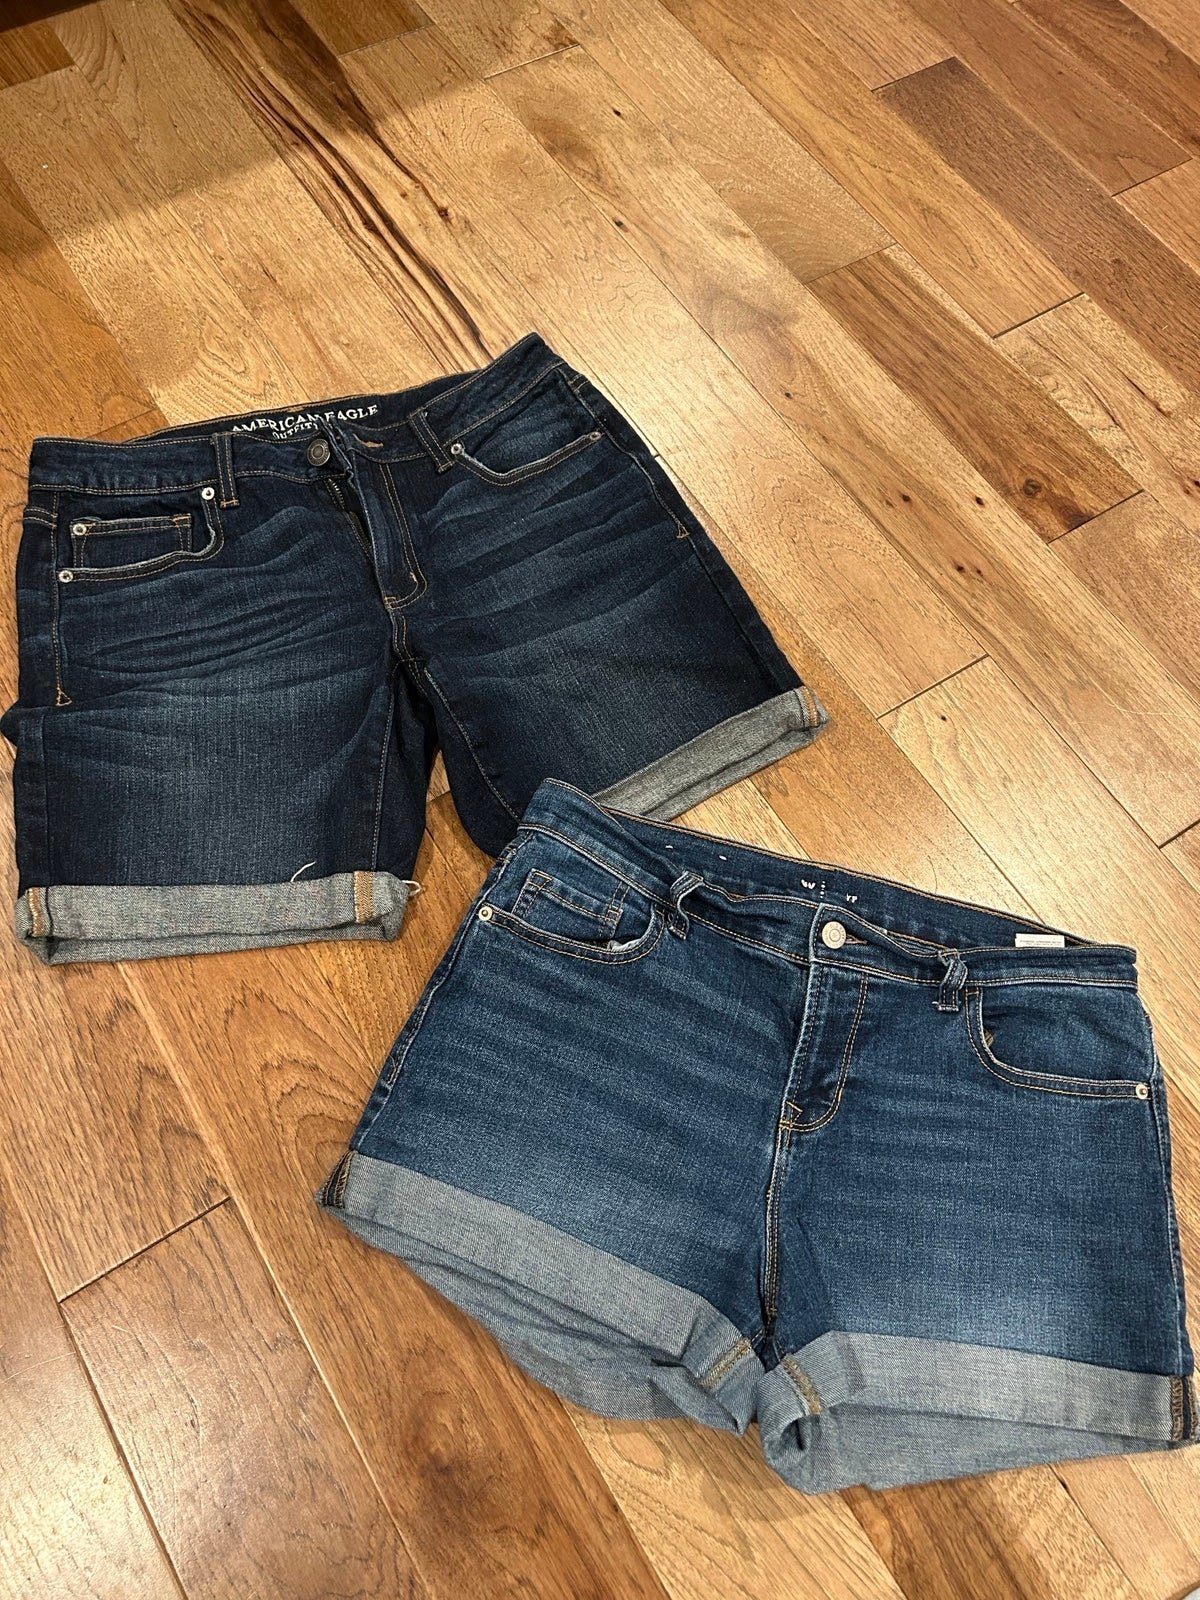 Affordable Jean Shorts women’s size 6 fukB9snBY online 